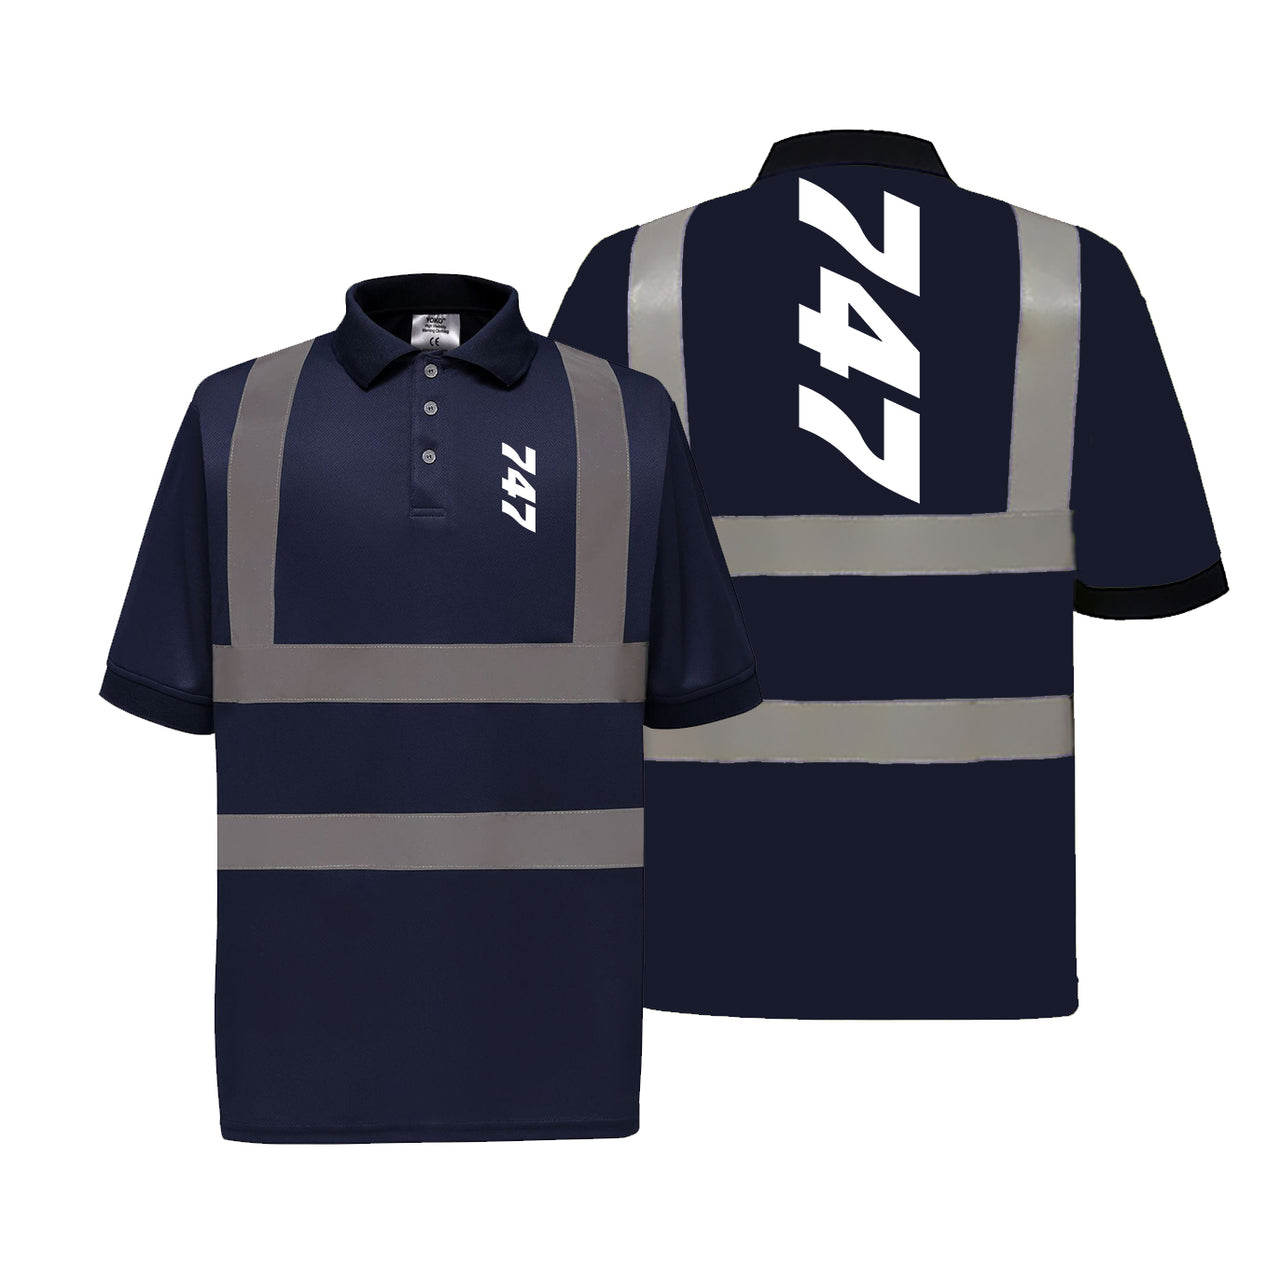 Boeing 747 Text Designed Reflective Polo T-Shirts